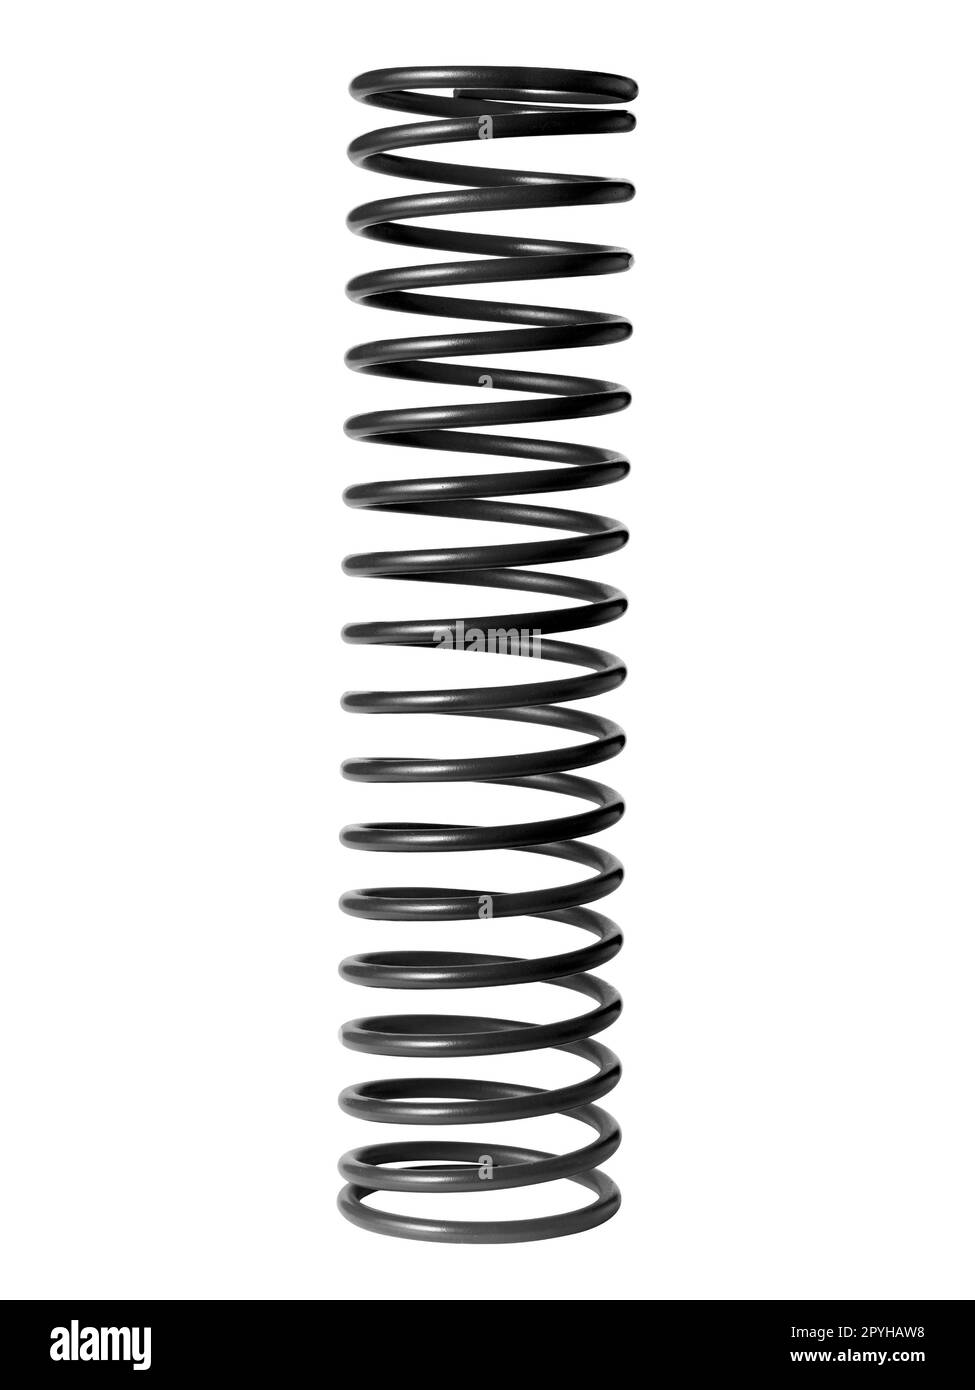 automotive suspension springs on a white background Stock Photo